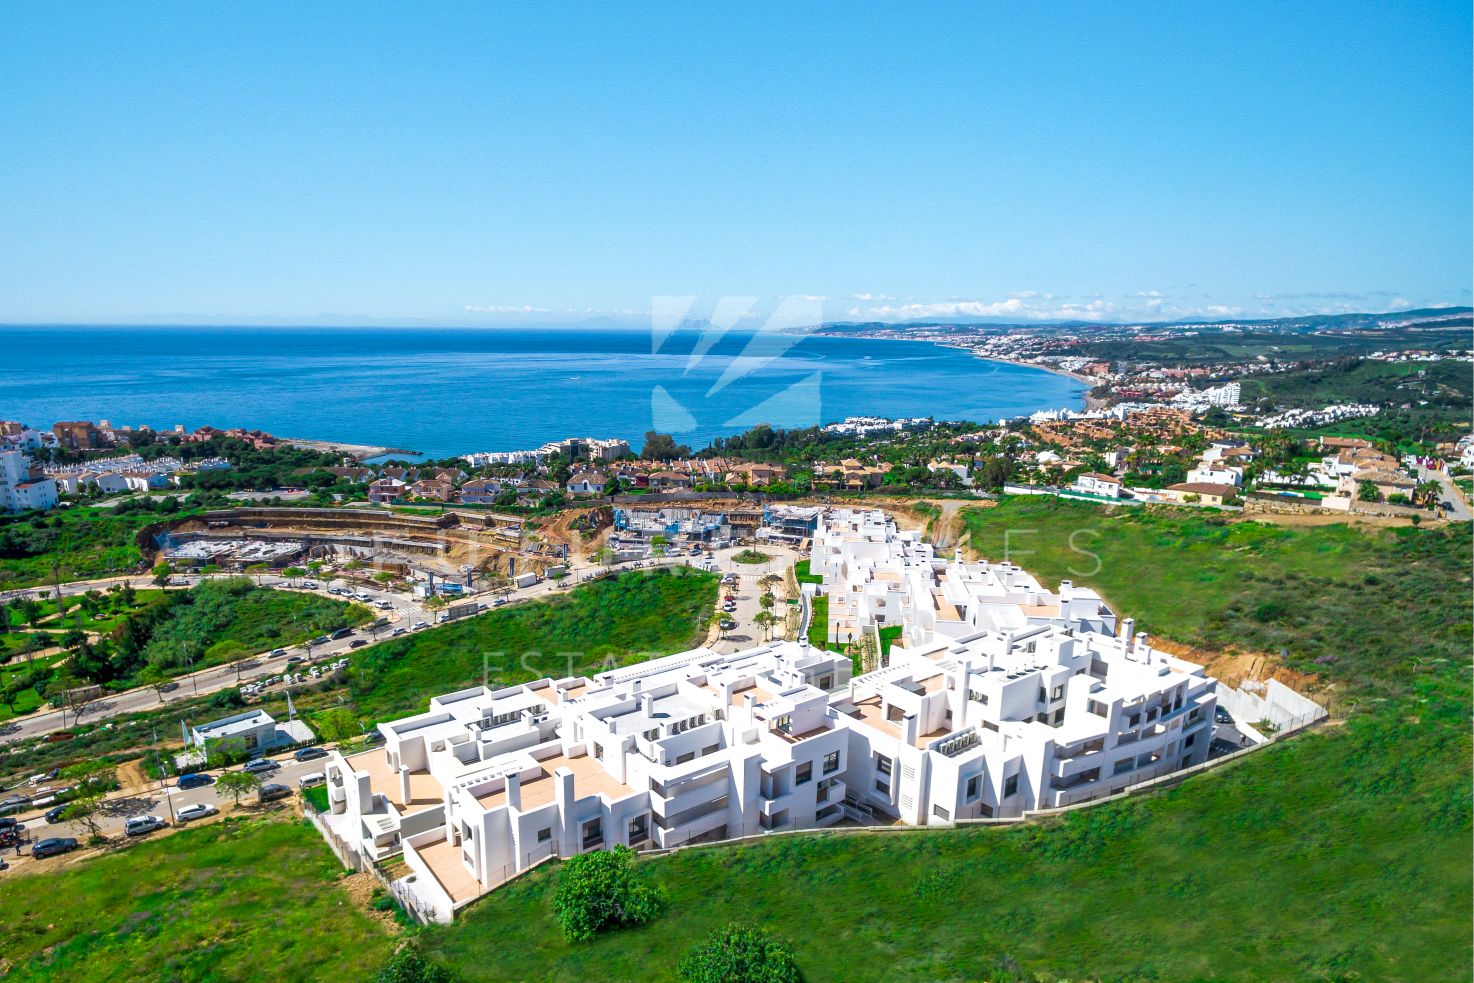 Brand new modern stylish apartments near Estepona Port and The Town Centre READY TO MOVE INTO NOW!